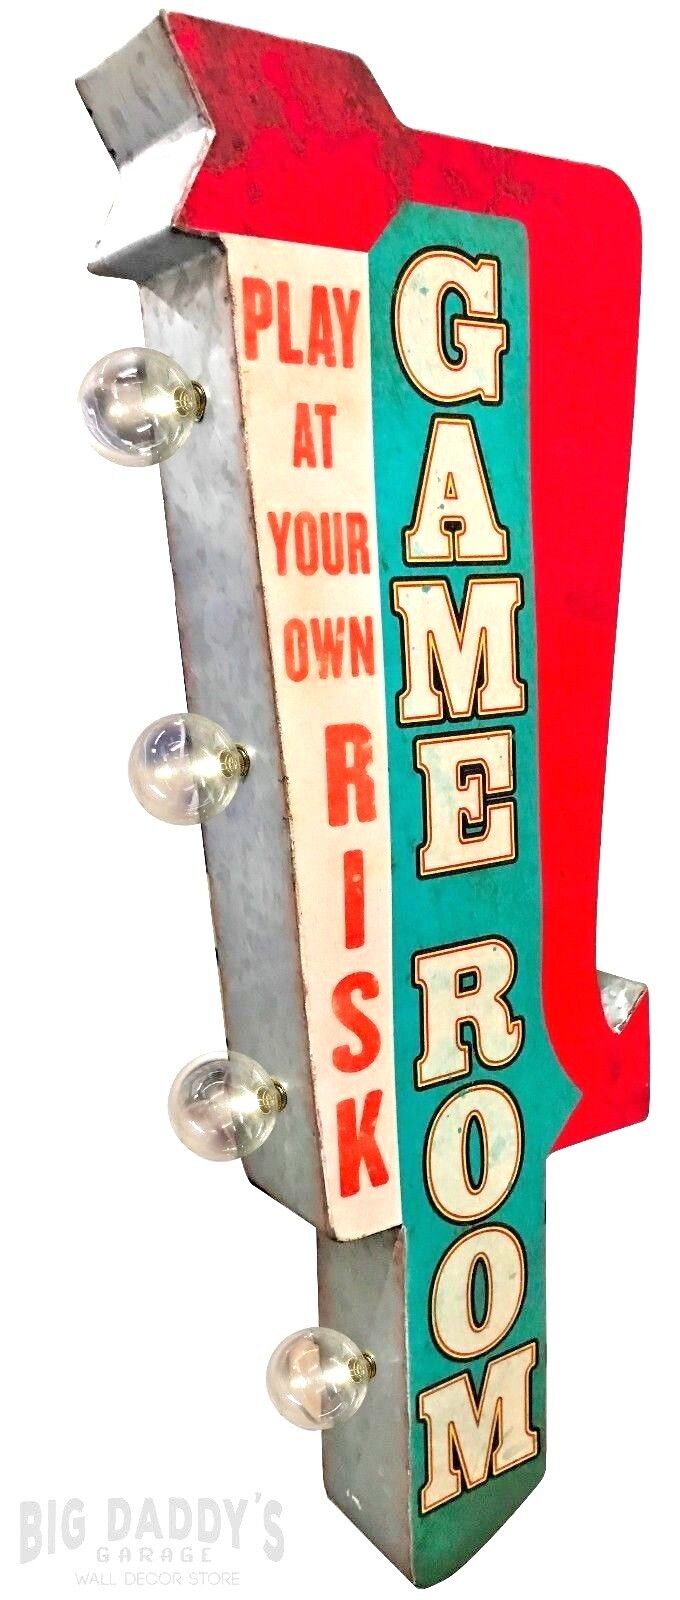 Game Room W/ Arrow Retro Double Sided Metal Sign W/ LED Lights, Arcade, Man Cave